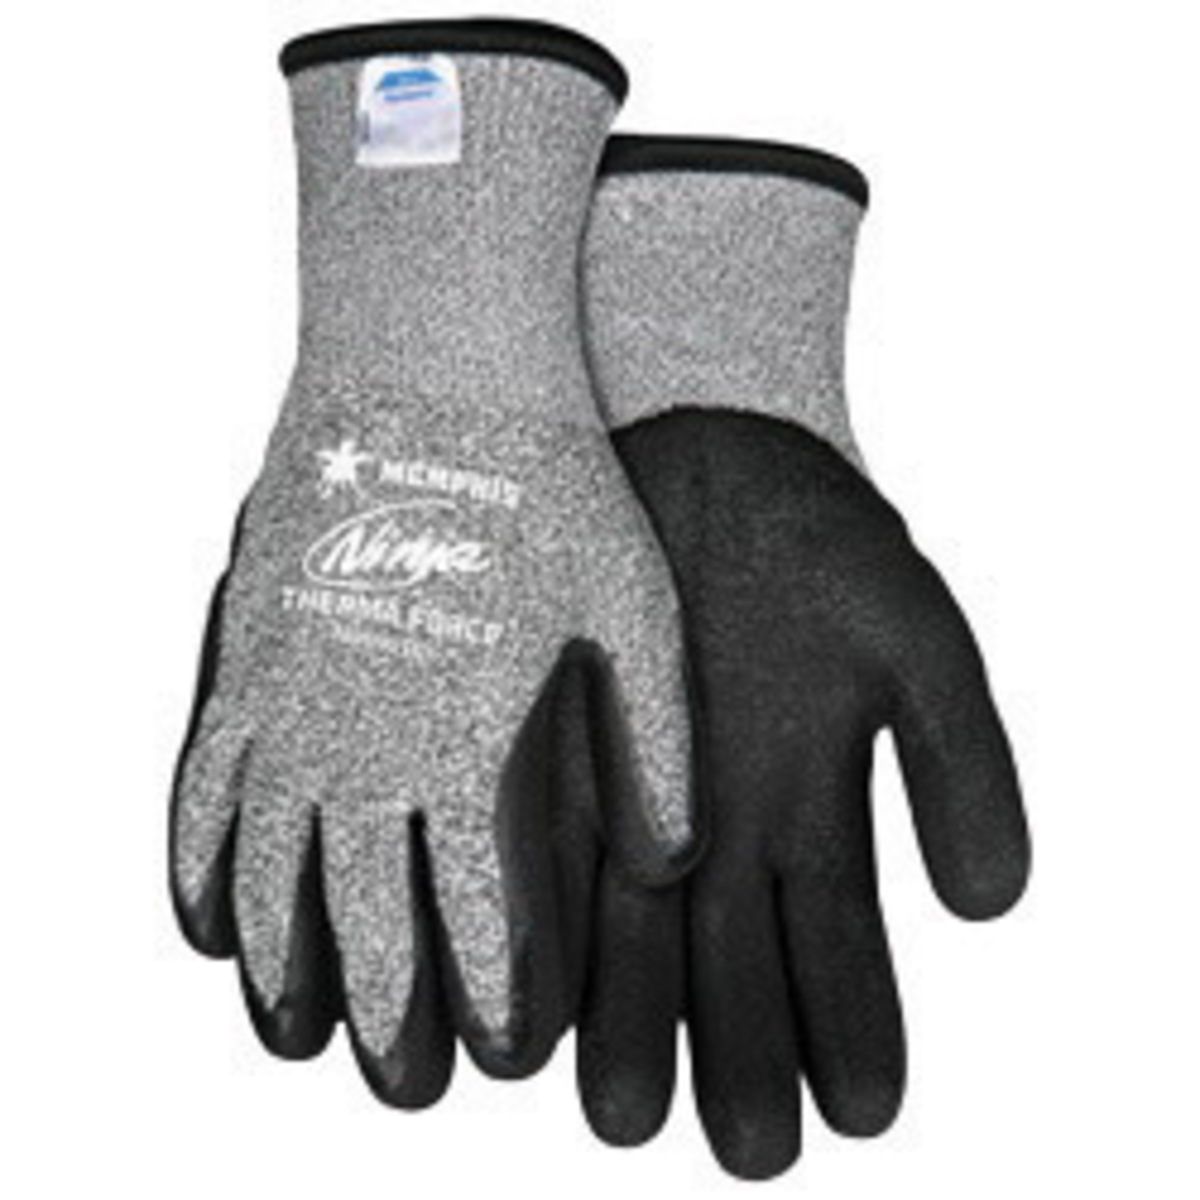 Memphis Glove Large Black And Gray Ninja® Therma Force 7 Gauge Acrylic Terry Lined Cold Weather Gloves With Knit Wrist, Salt/Pep